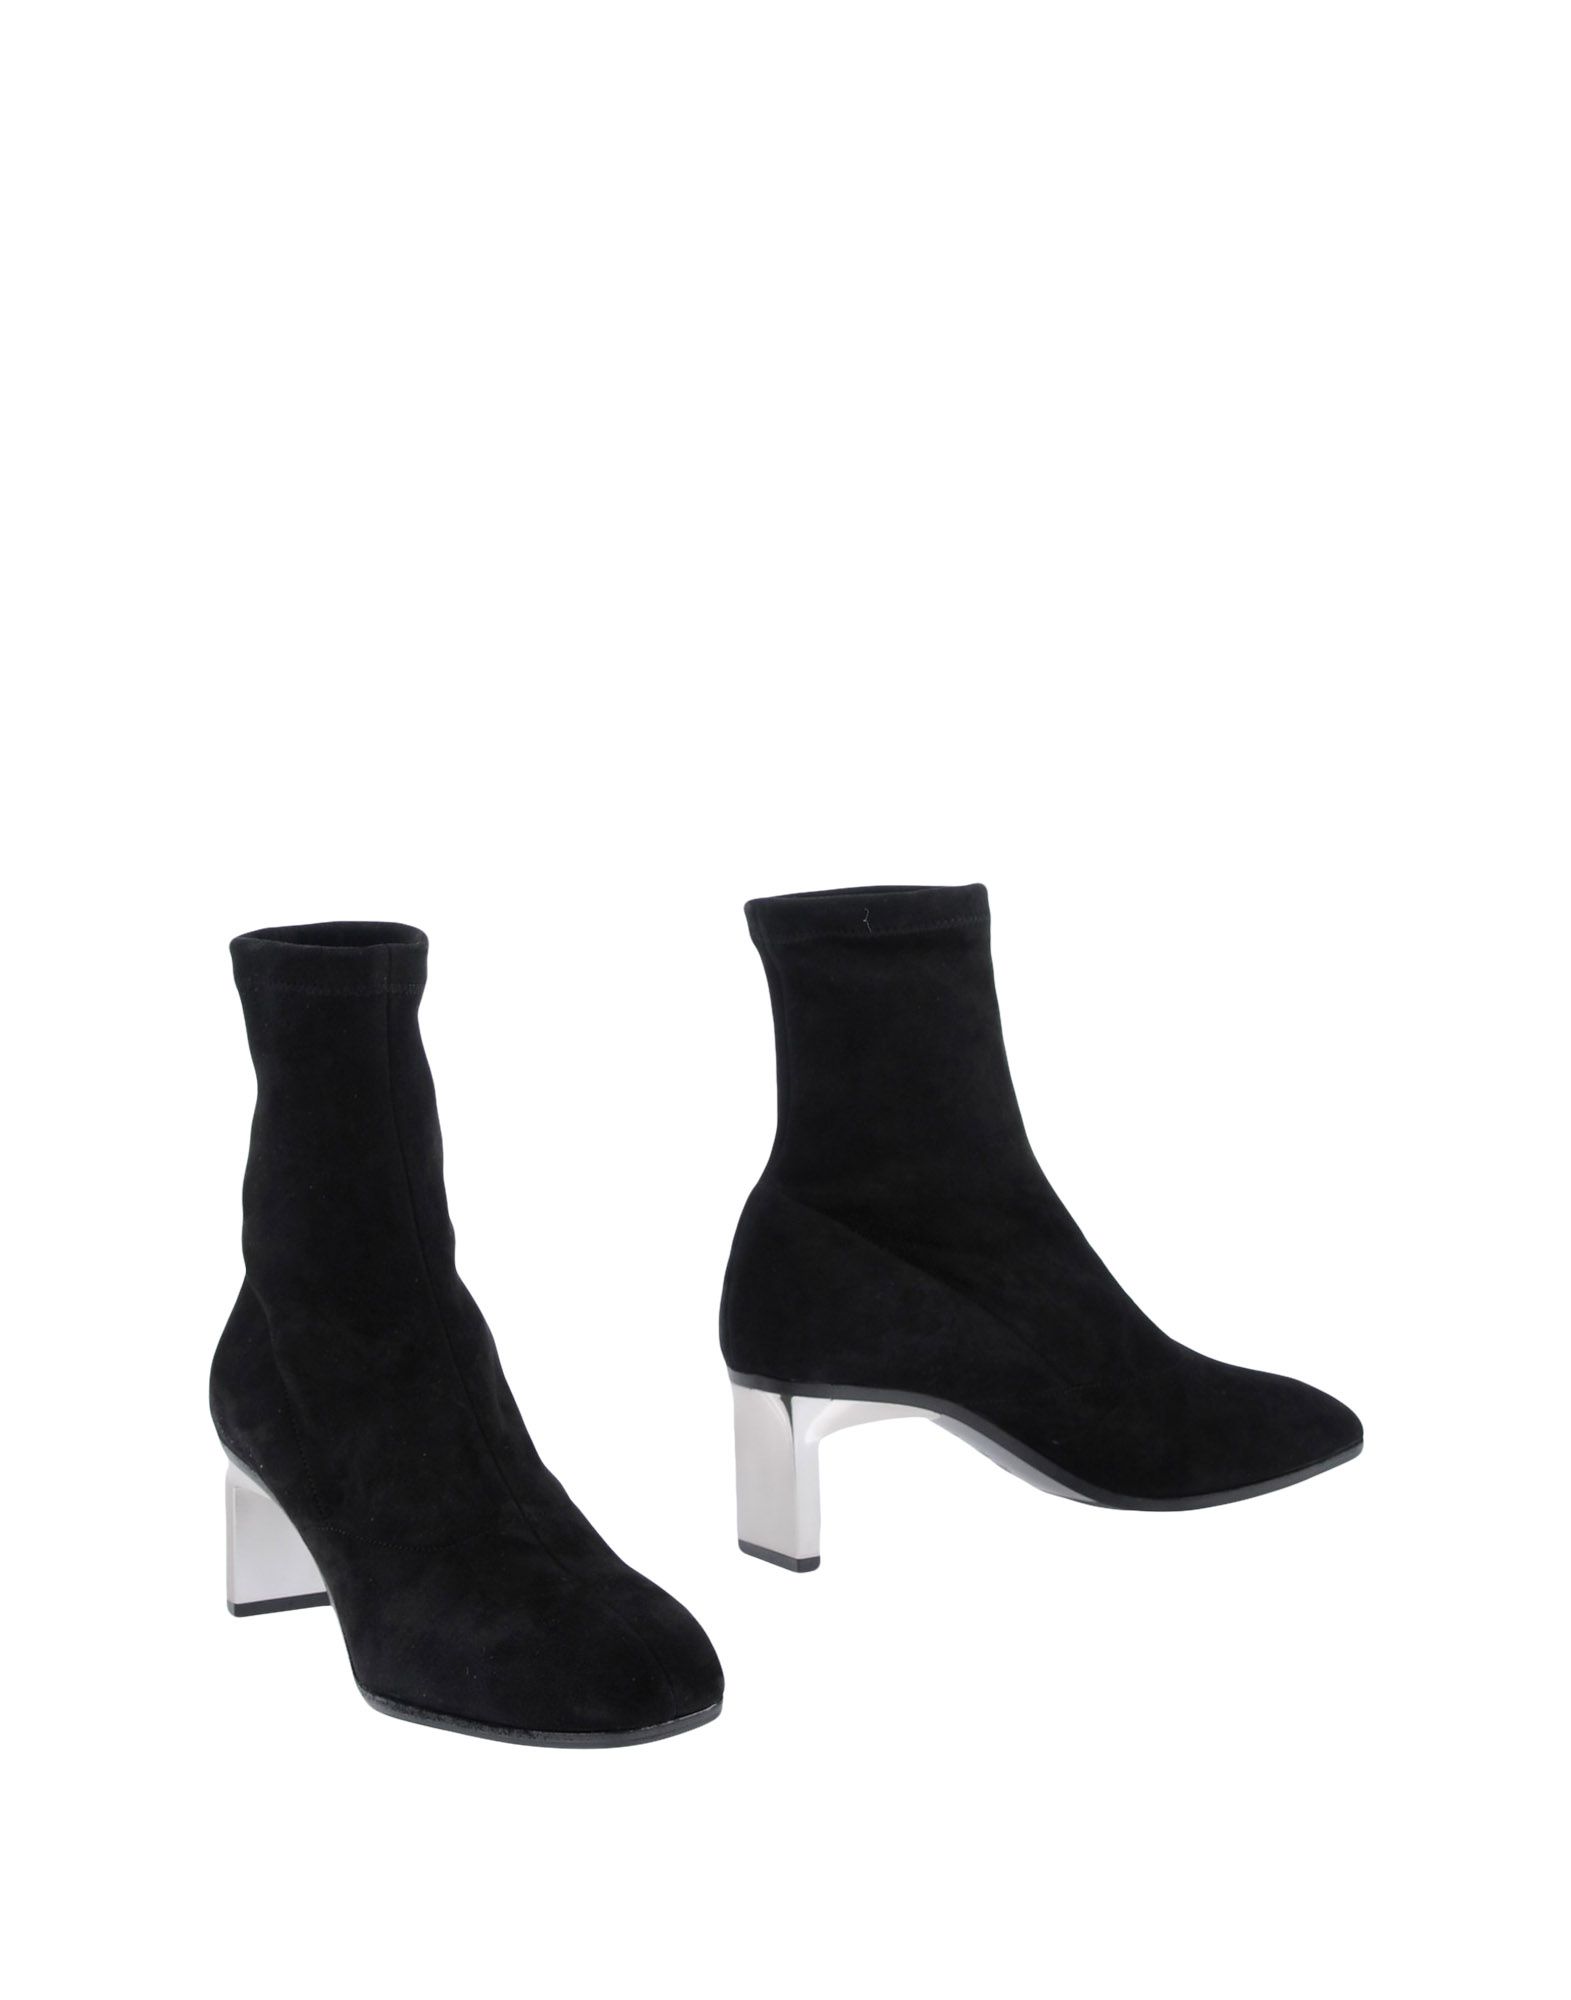 3.1 PHILLIP LIM / フィリップ リム ANKLE BOOTS,11463244DS 7